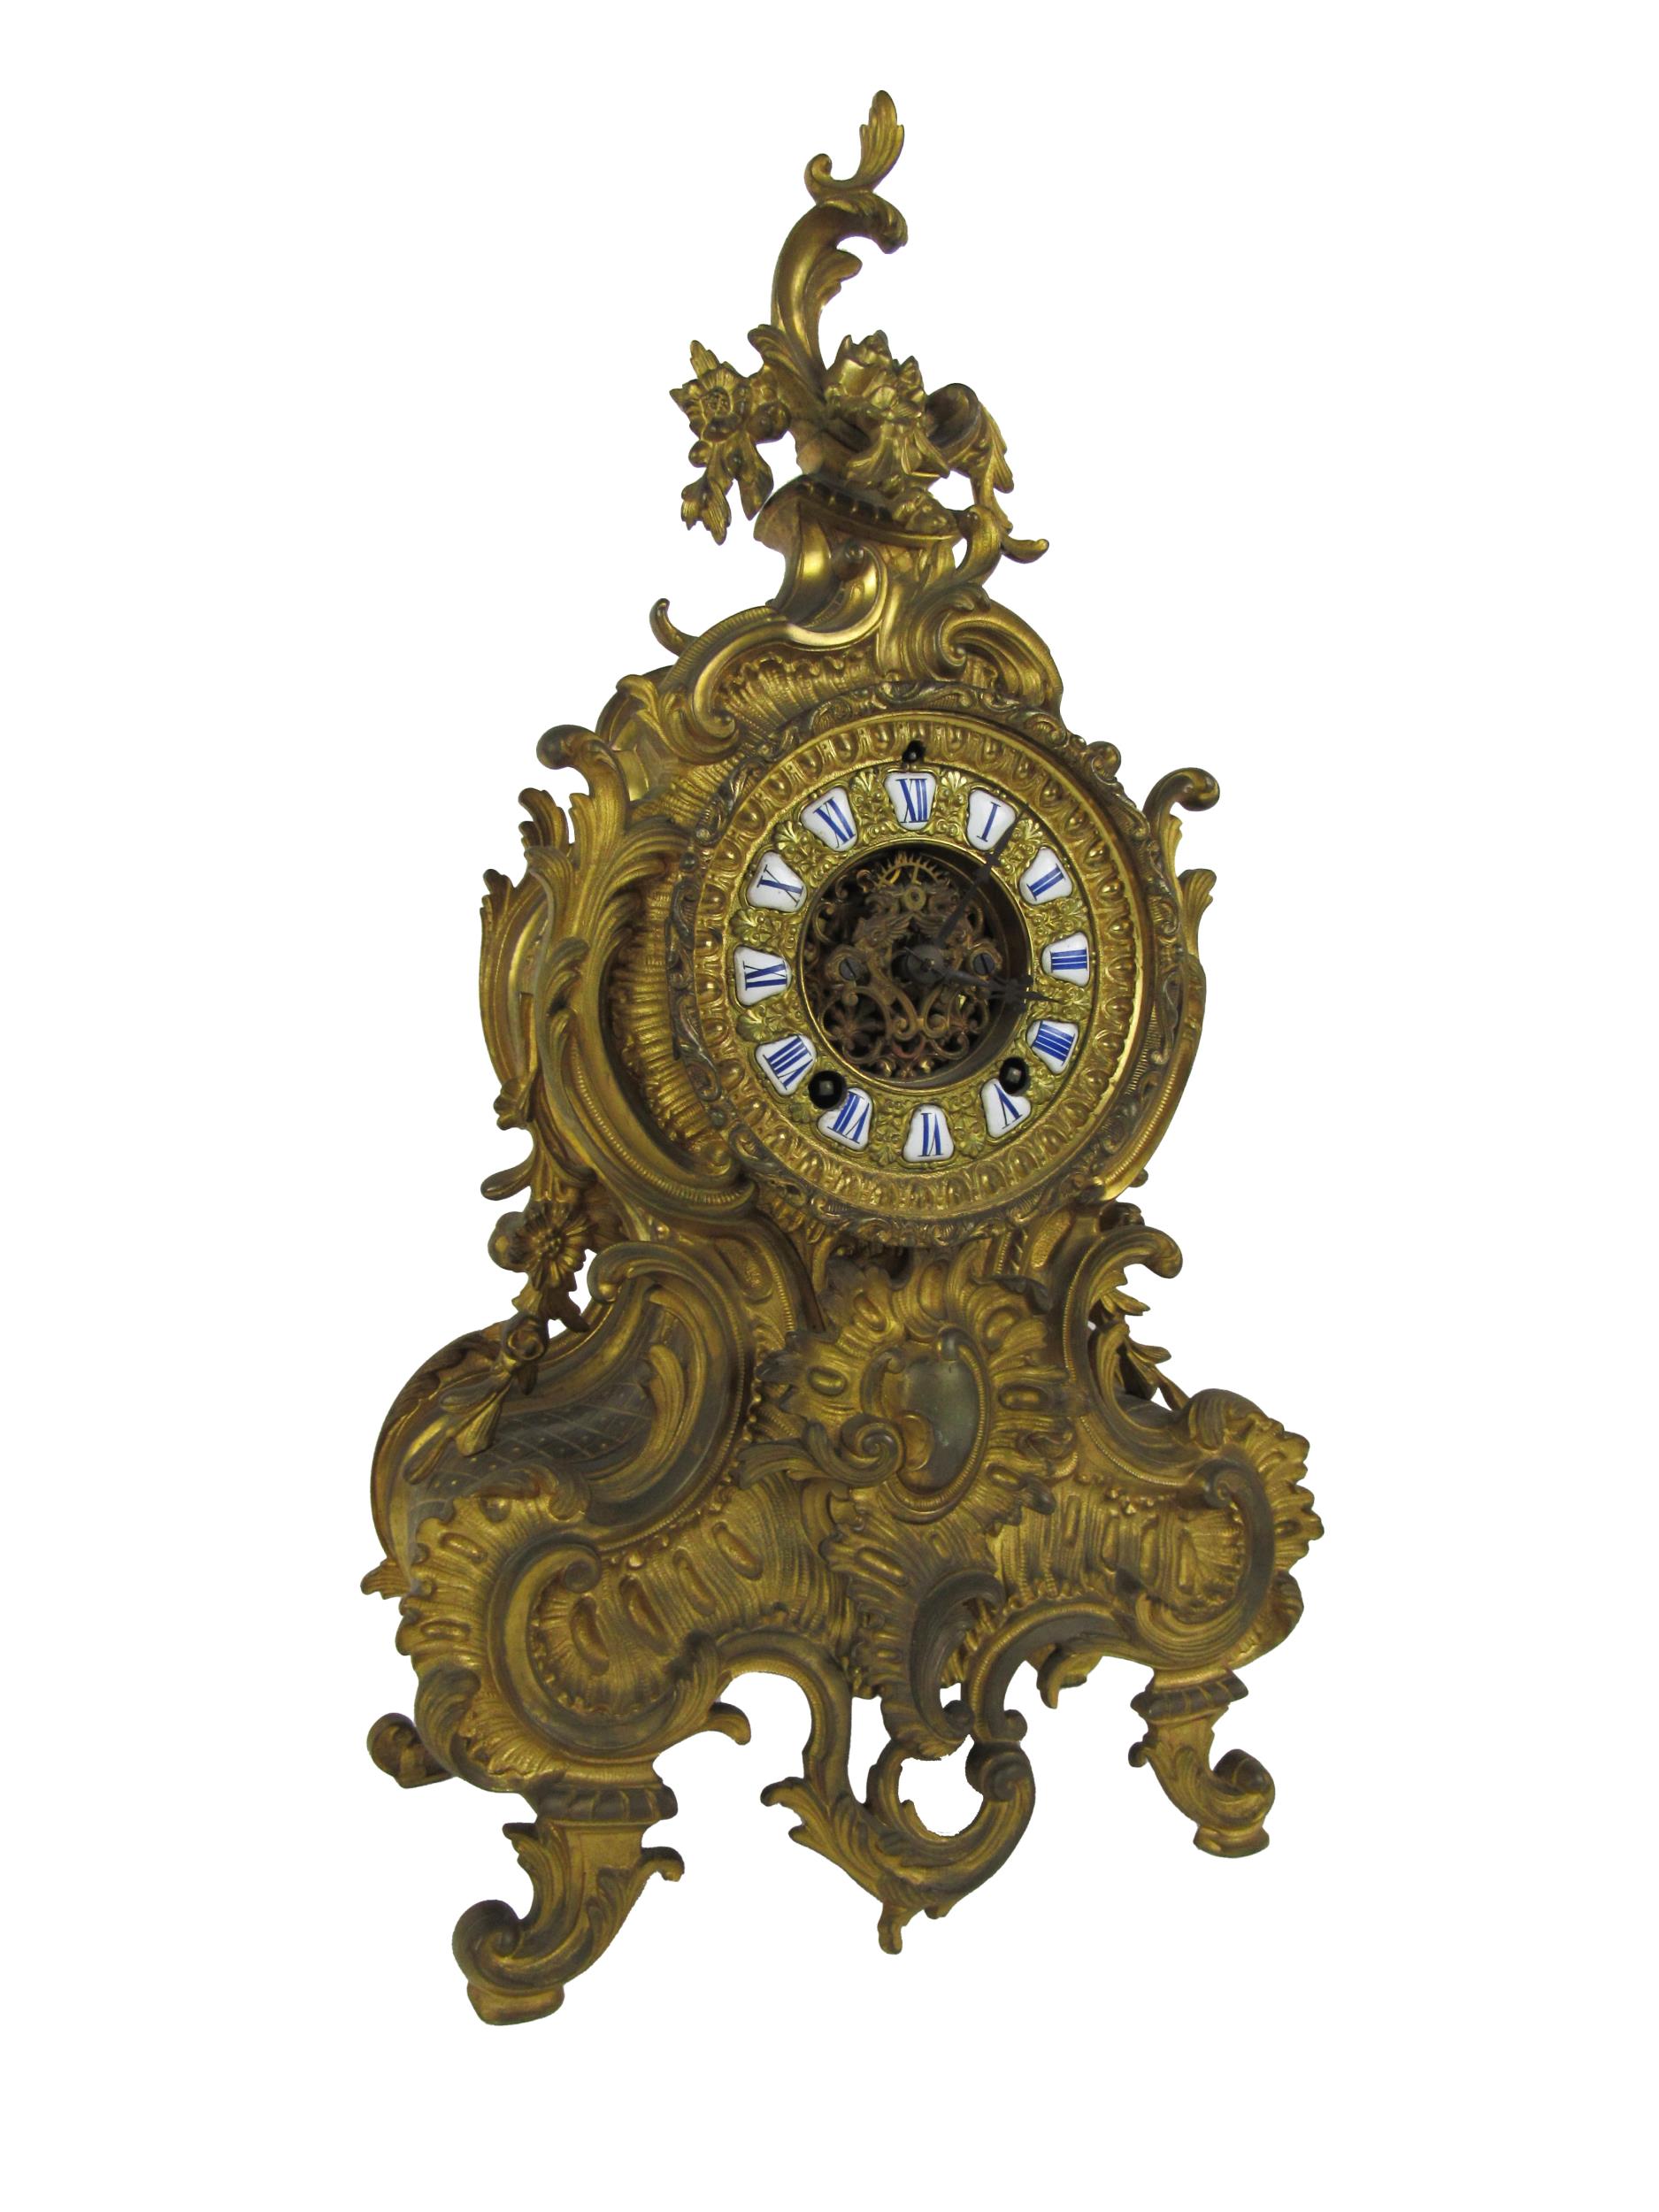 A fine quality Louis XVI French style ormolu Clock, the overall decorated in the rococo taste,